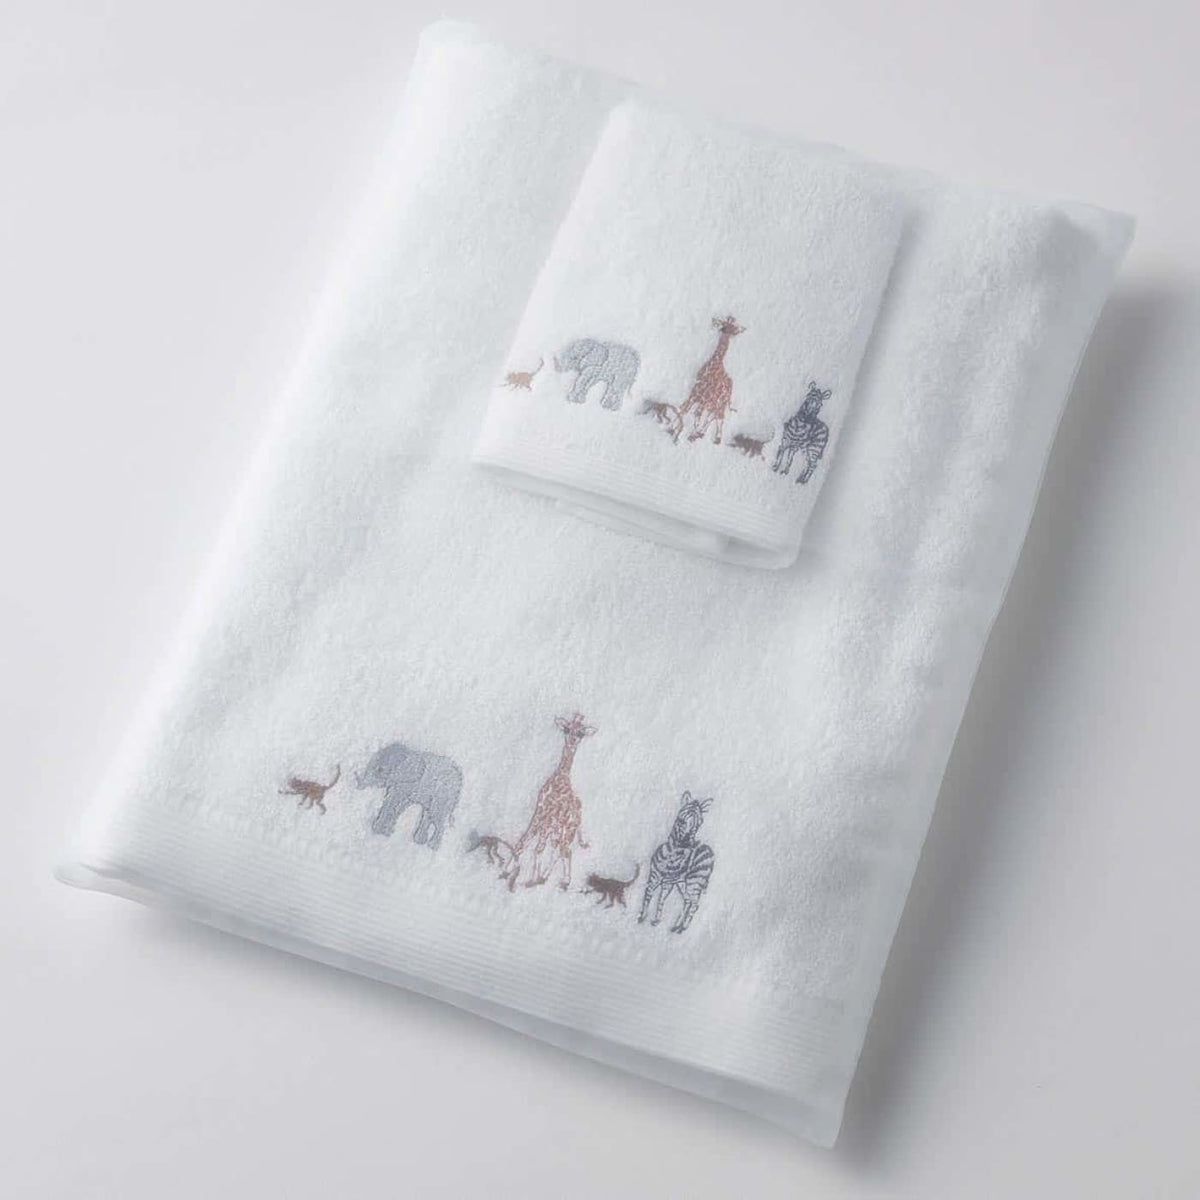 Jiggle &amp; Giggle Towel &amp; Face Washer Set in Organza Bag - Zoo Life - Zoo Life - BATHTIME &amp; CHANGING - TOWELS/WASHERS